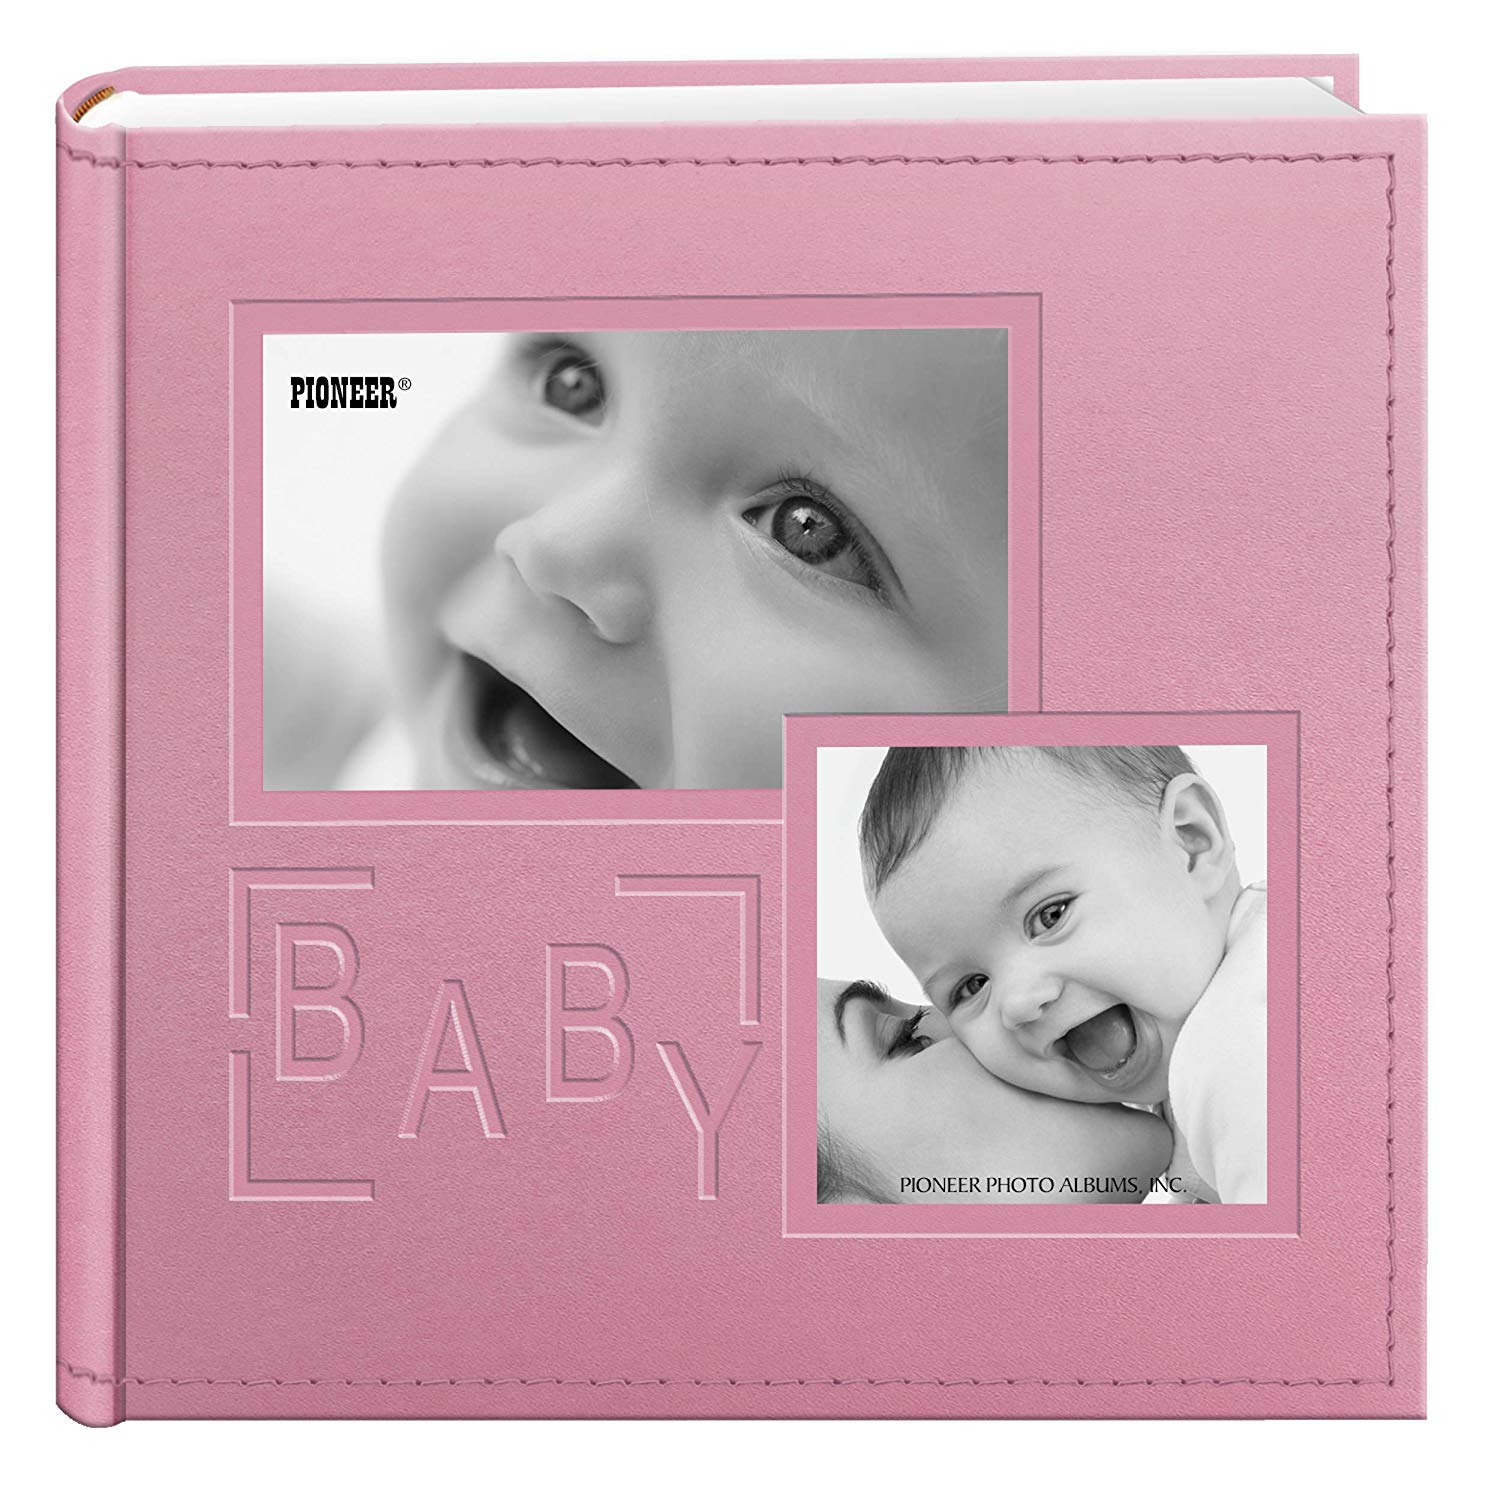 Photo4less Pioneer Pink Collage Frame Baby Album 4 6 Ultra Fine Permanent Marker Red Black